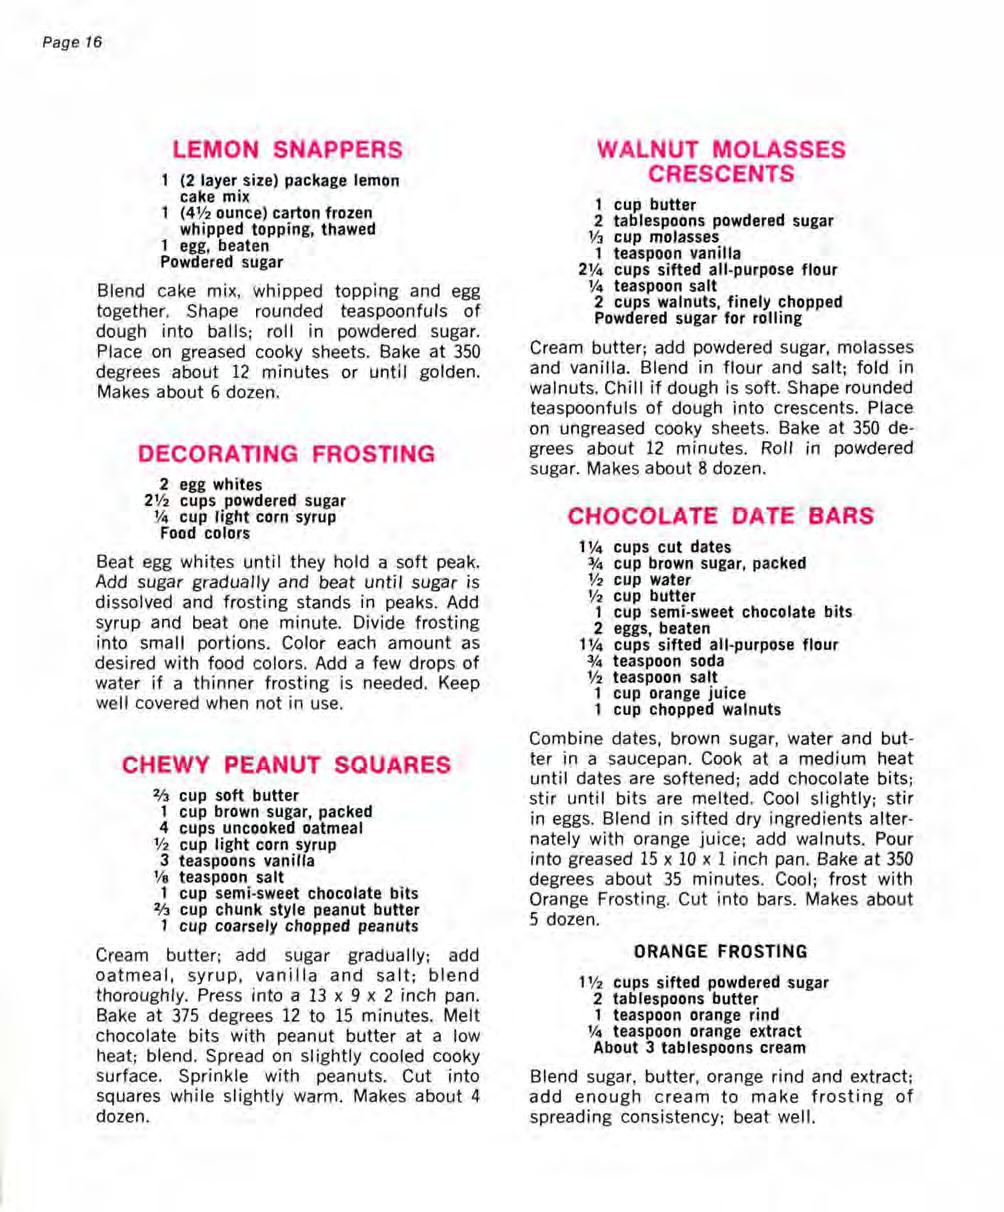 Page 16 LEMON SNAPPERS 1 (2 layer size) package lemon cake mix 1 (4 1 /2 ounce) carton frozen whipped topping, thawed 1 egg, beaten Powdered sugar Blend cake mix, whipped topping and egg together.